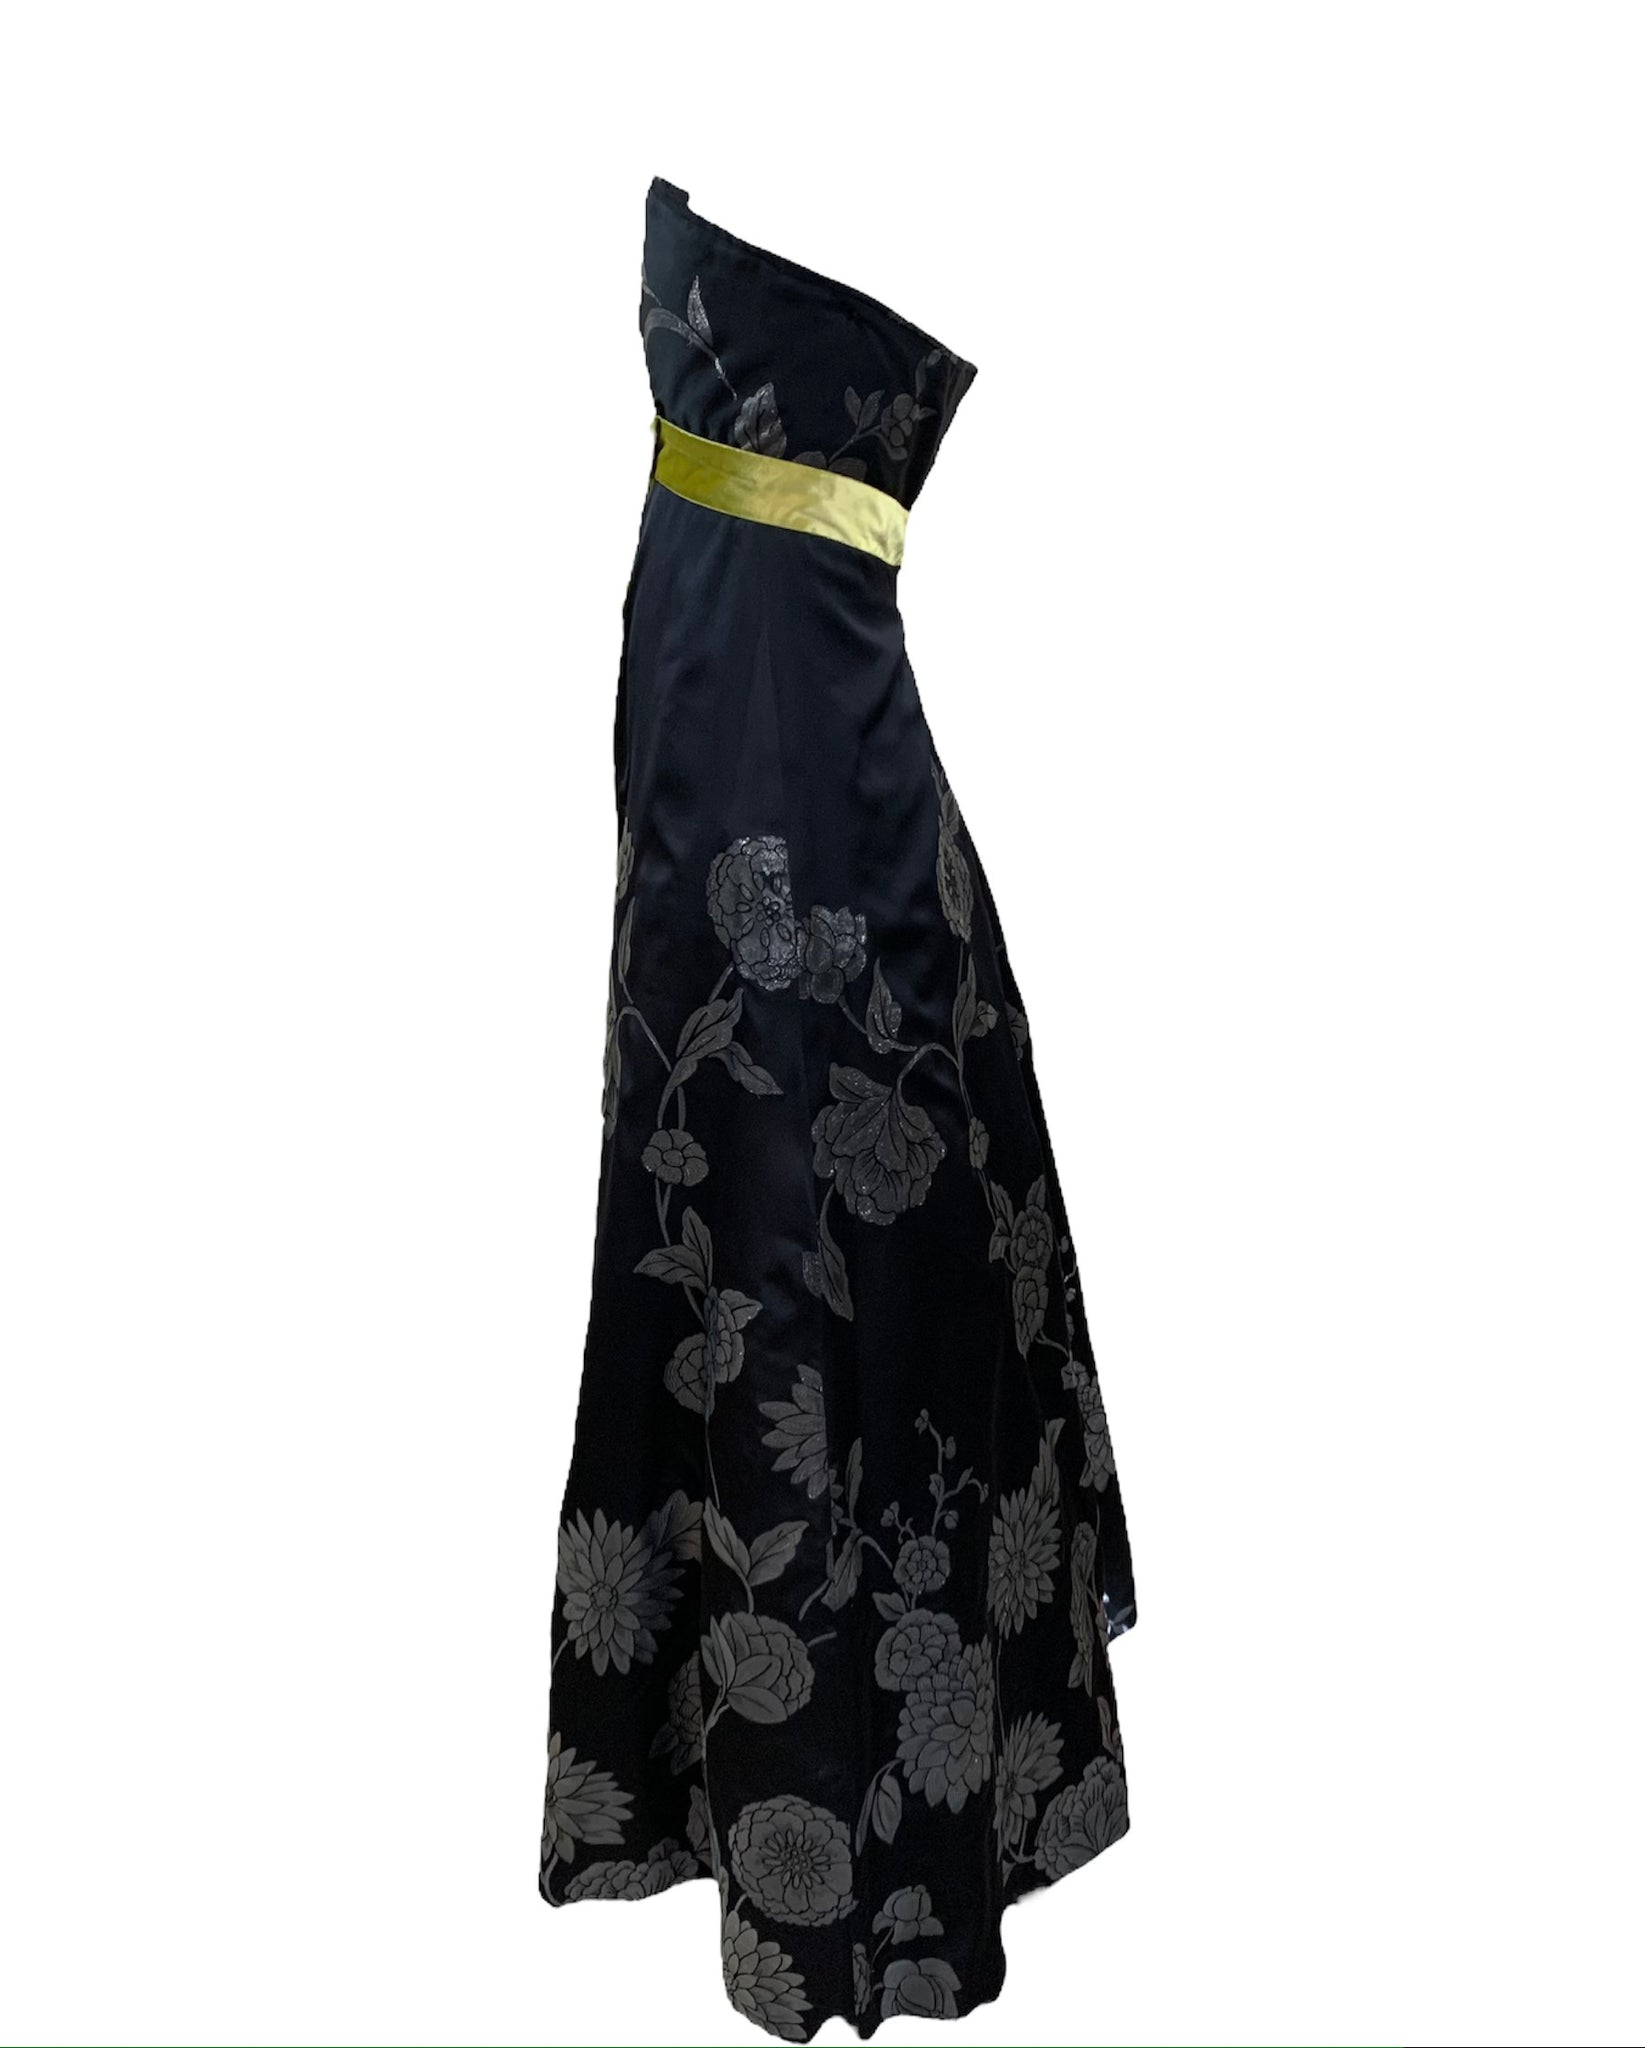 Martin Grant Black Strapless Gown with Chartreuse Sash SIDE 2 of 5